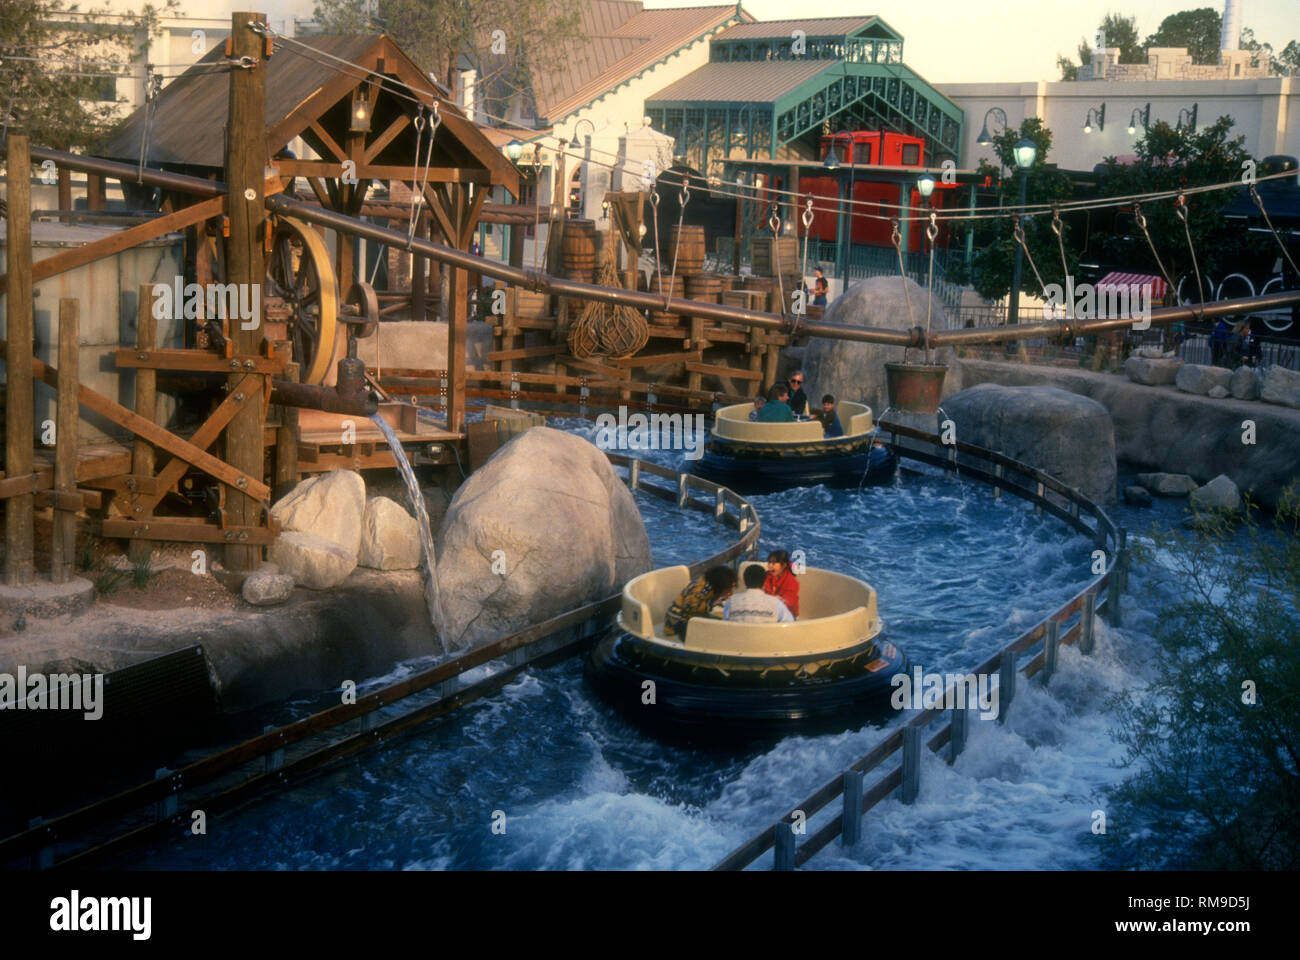 LAS VEGAS, NV - DECEMBER 31: A general view of atmosphere of Grand Canyon  River Rapids ride at MGM Grand Adventures Theme Park on December 31, 1993  at MGM Grand Hotel and